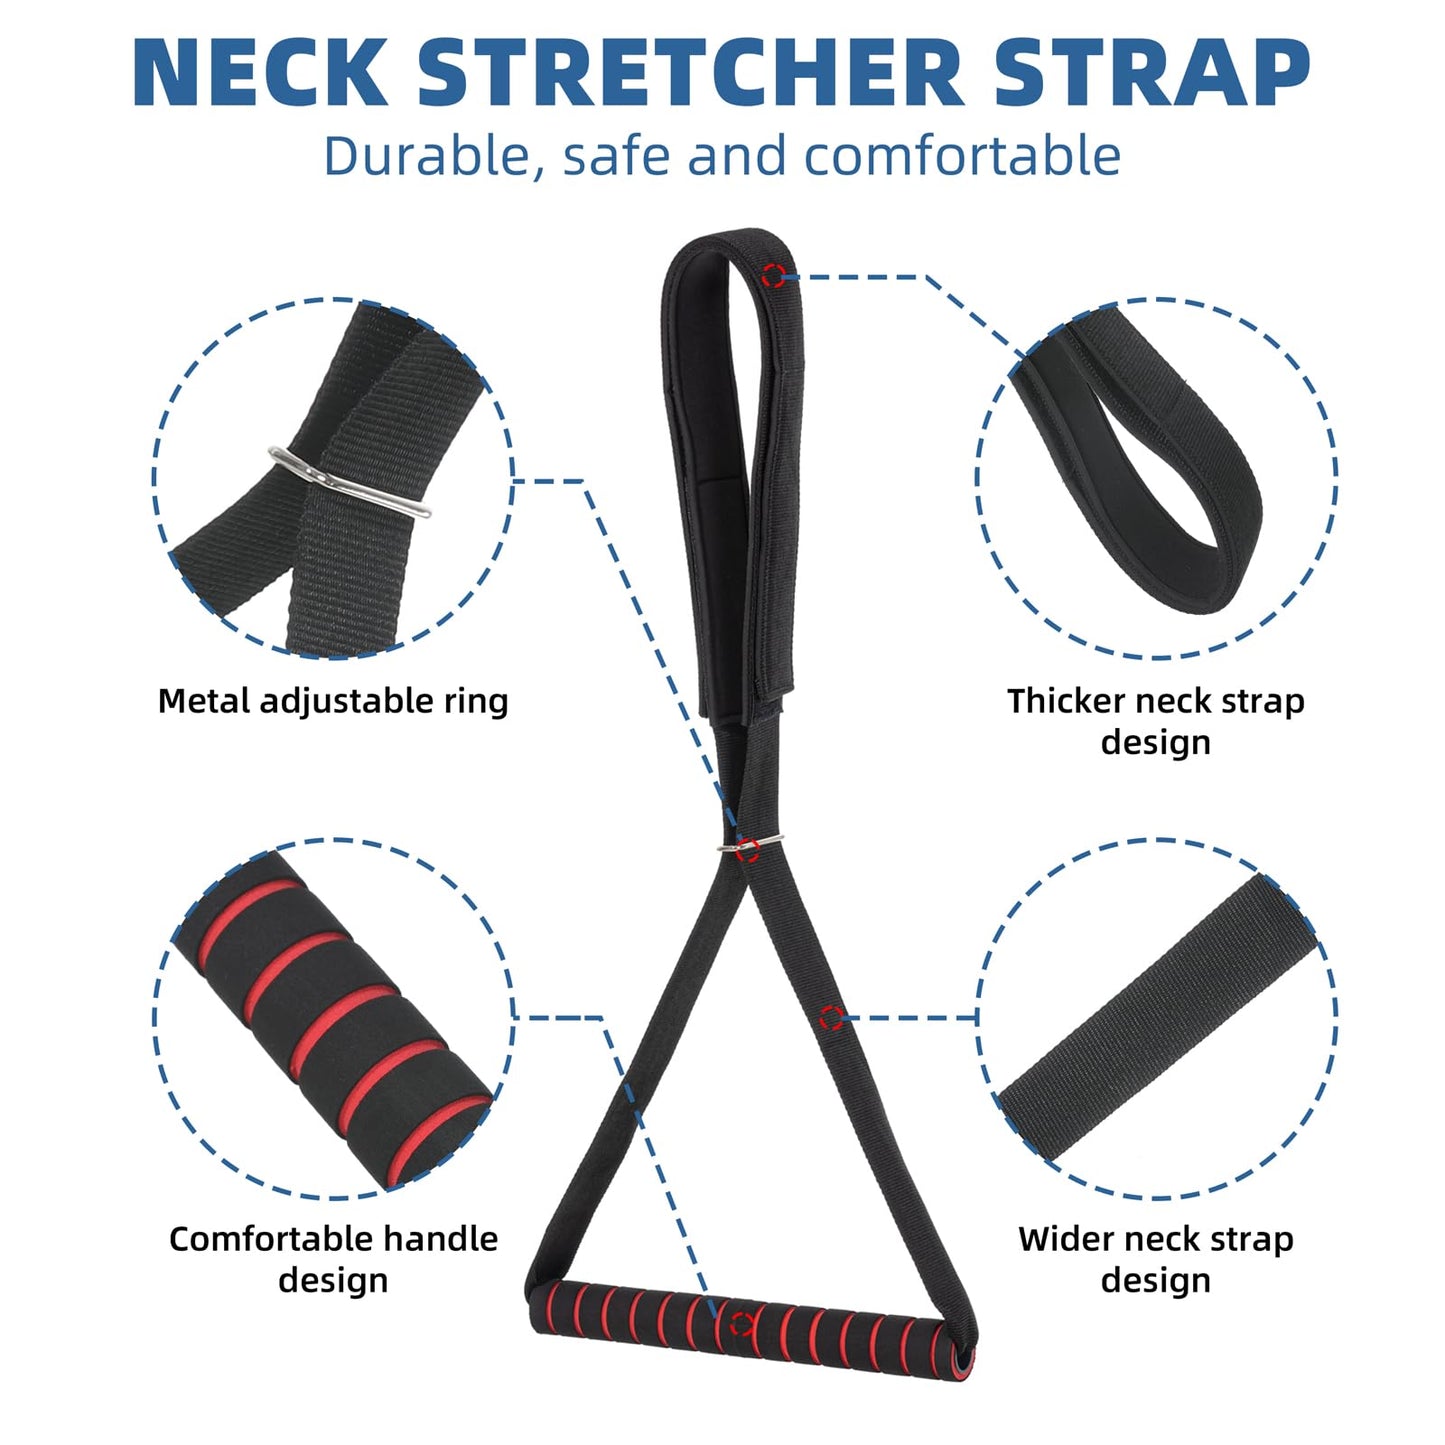 Fewener Neck Stretcher Strap - Decompression Device for Spine Chiropractic, Neck Discomfort & Headache Relief with Comfortable Handle, Chin Strap, Black/Red Strap Handle - Ultimate Neck Strap Tool